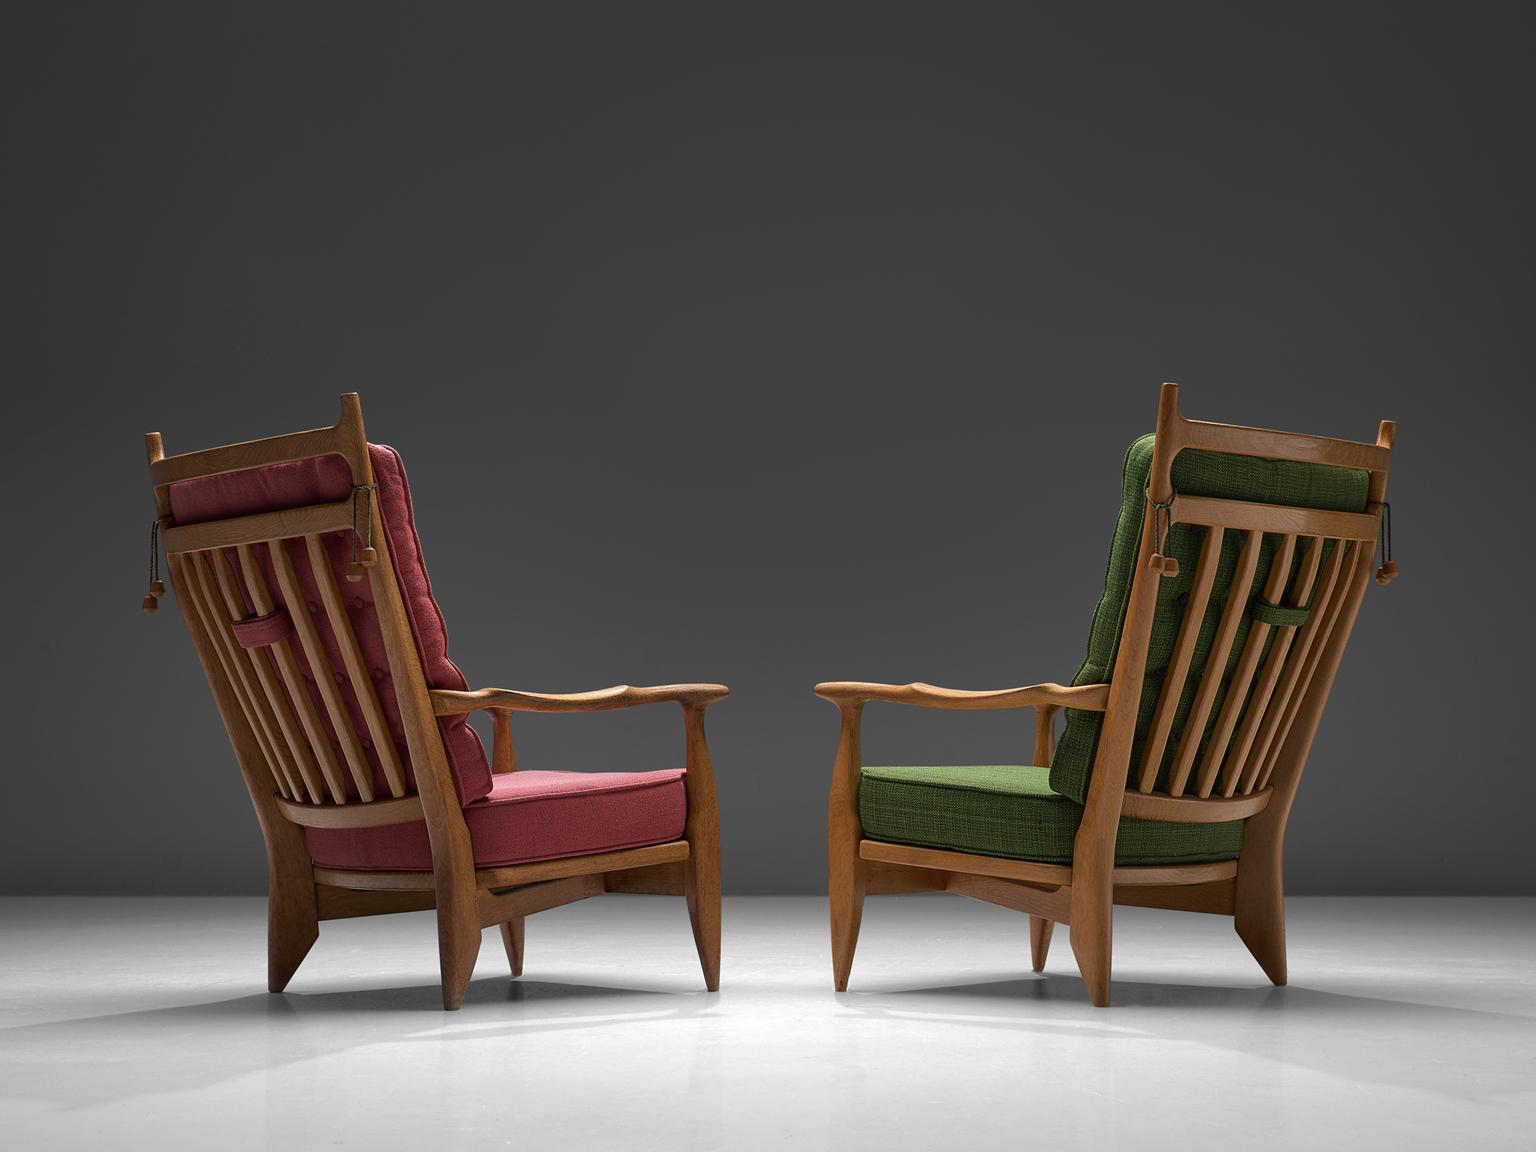 Guillerme et Chambron, set of 2 lounge chairs oak, pink and green upholstery, oak, France, 1960s. 

Guillerme and Chambron are known for their high quality solid oak furniture, of which these two lounge chairs are another great example. These